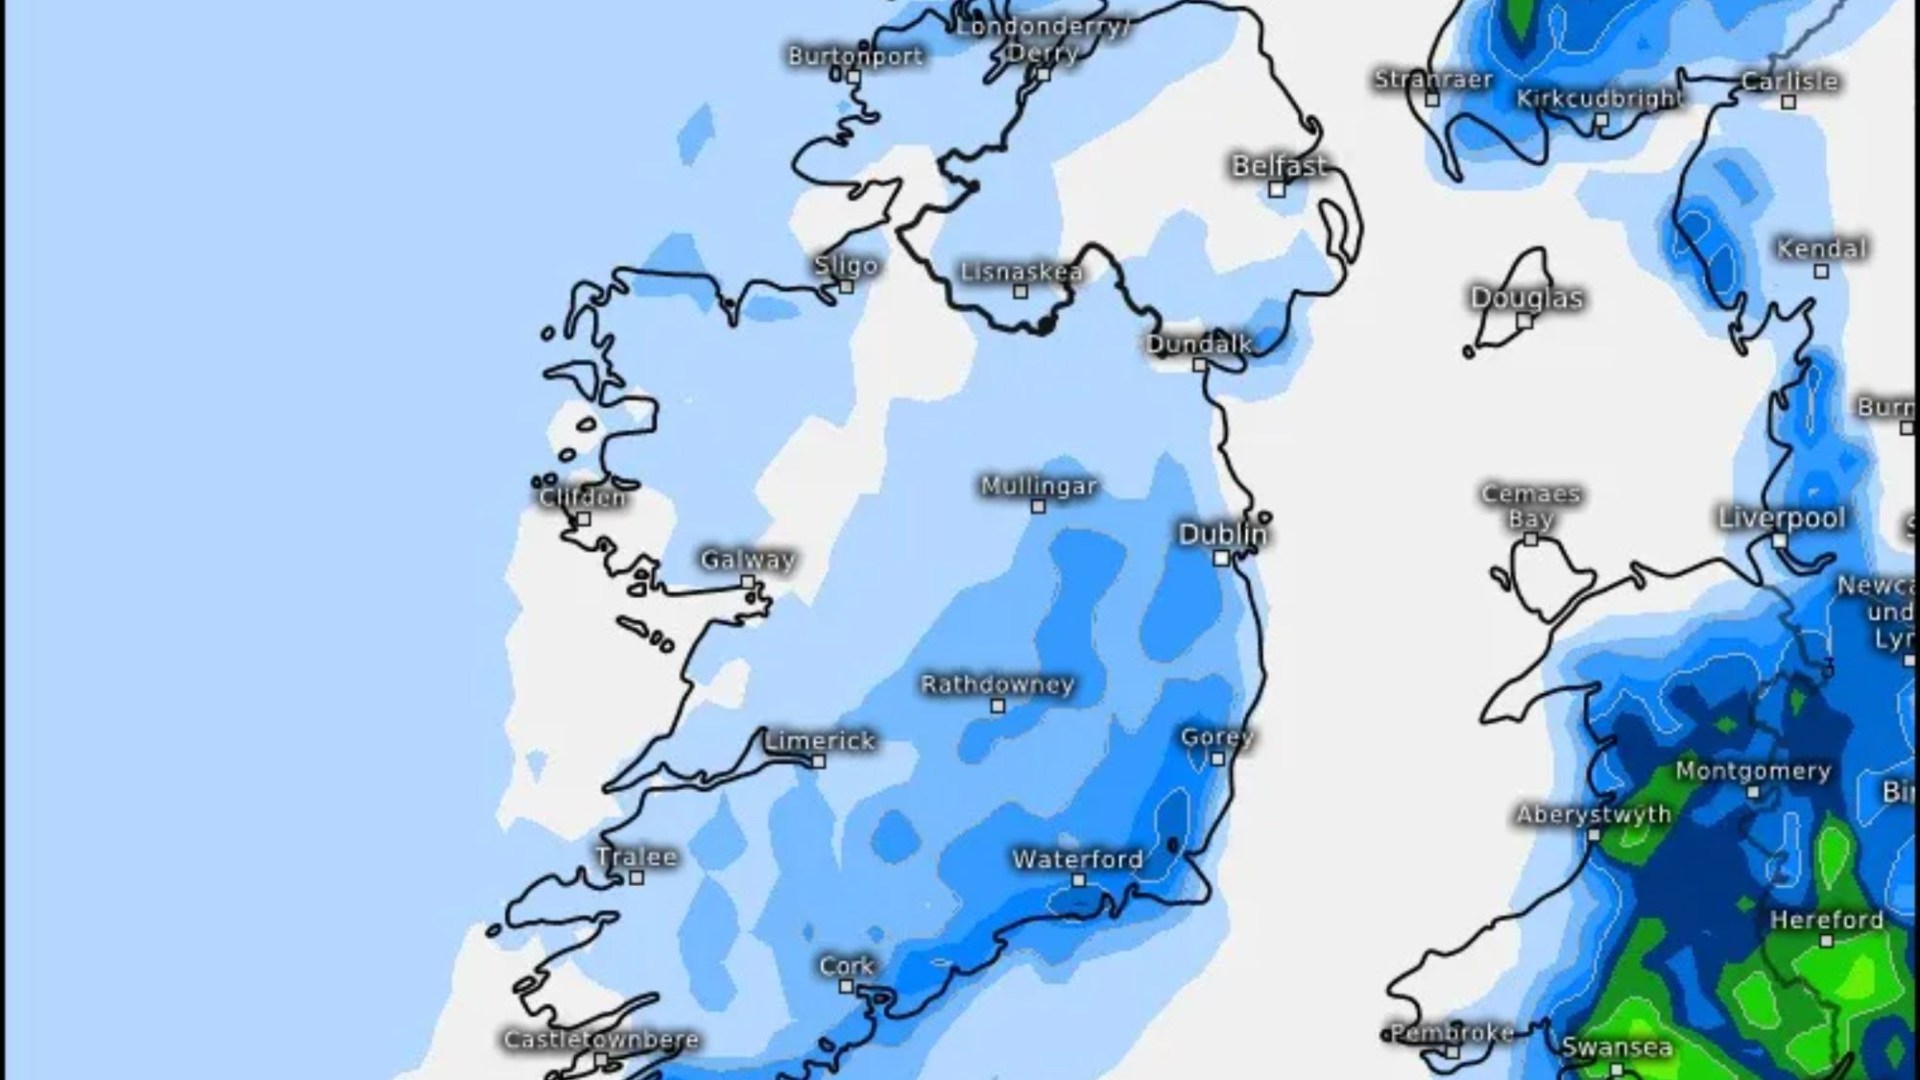 Ireland for ‘cool’ weekend with 21C heat but Met Eireann gives thunderstorm warning and major turn next week [Video]